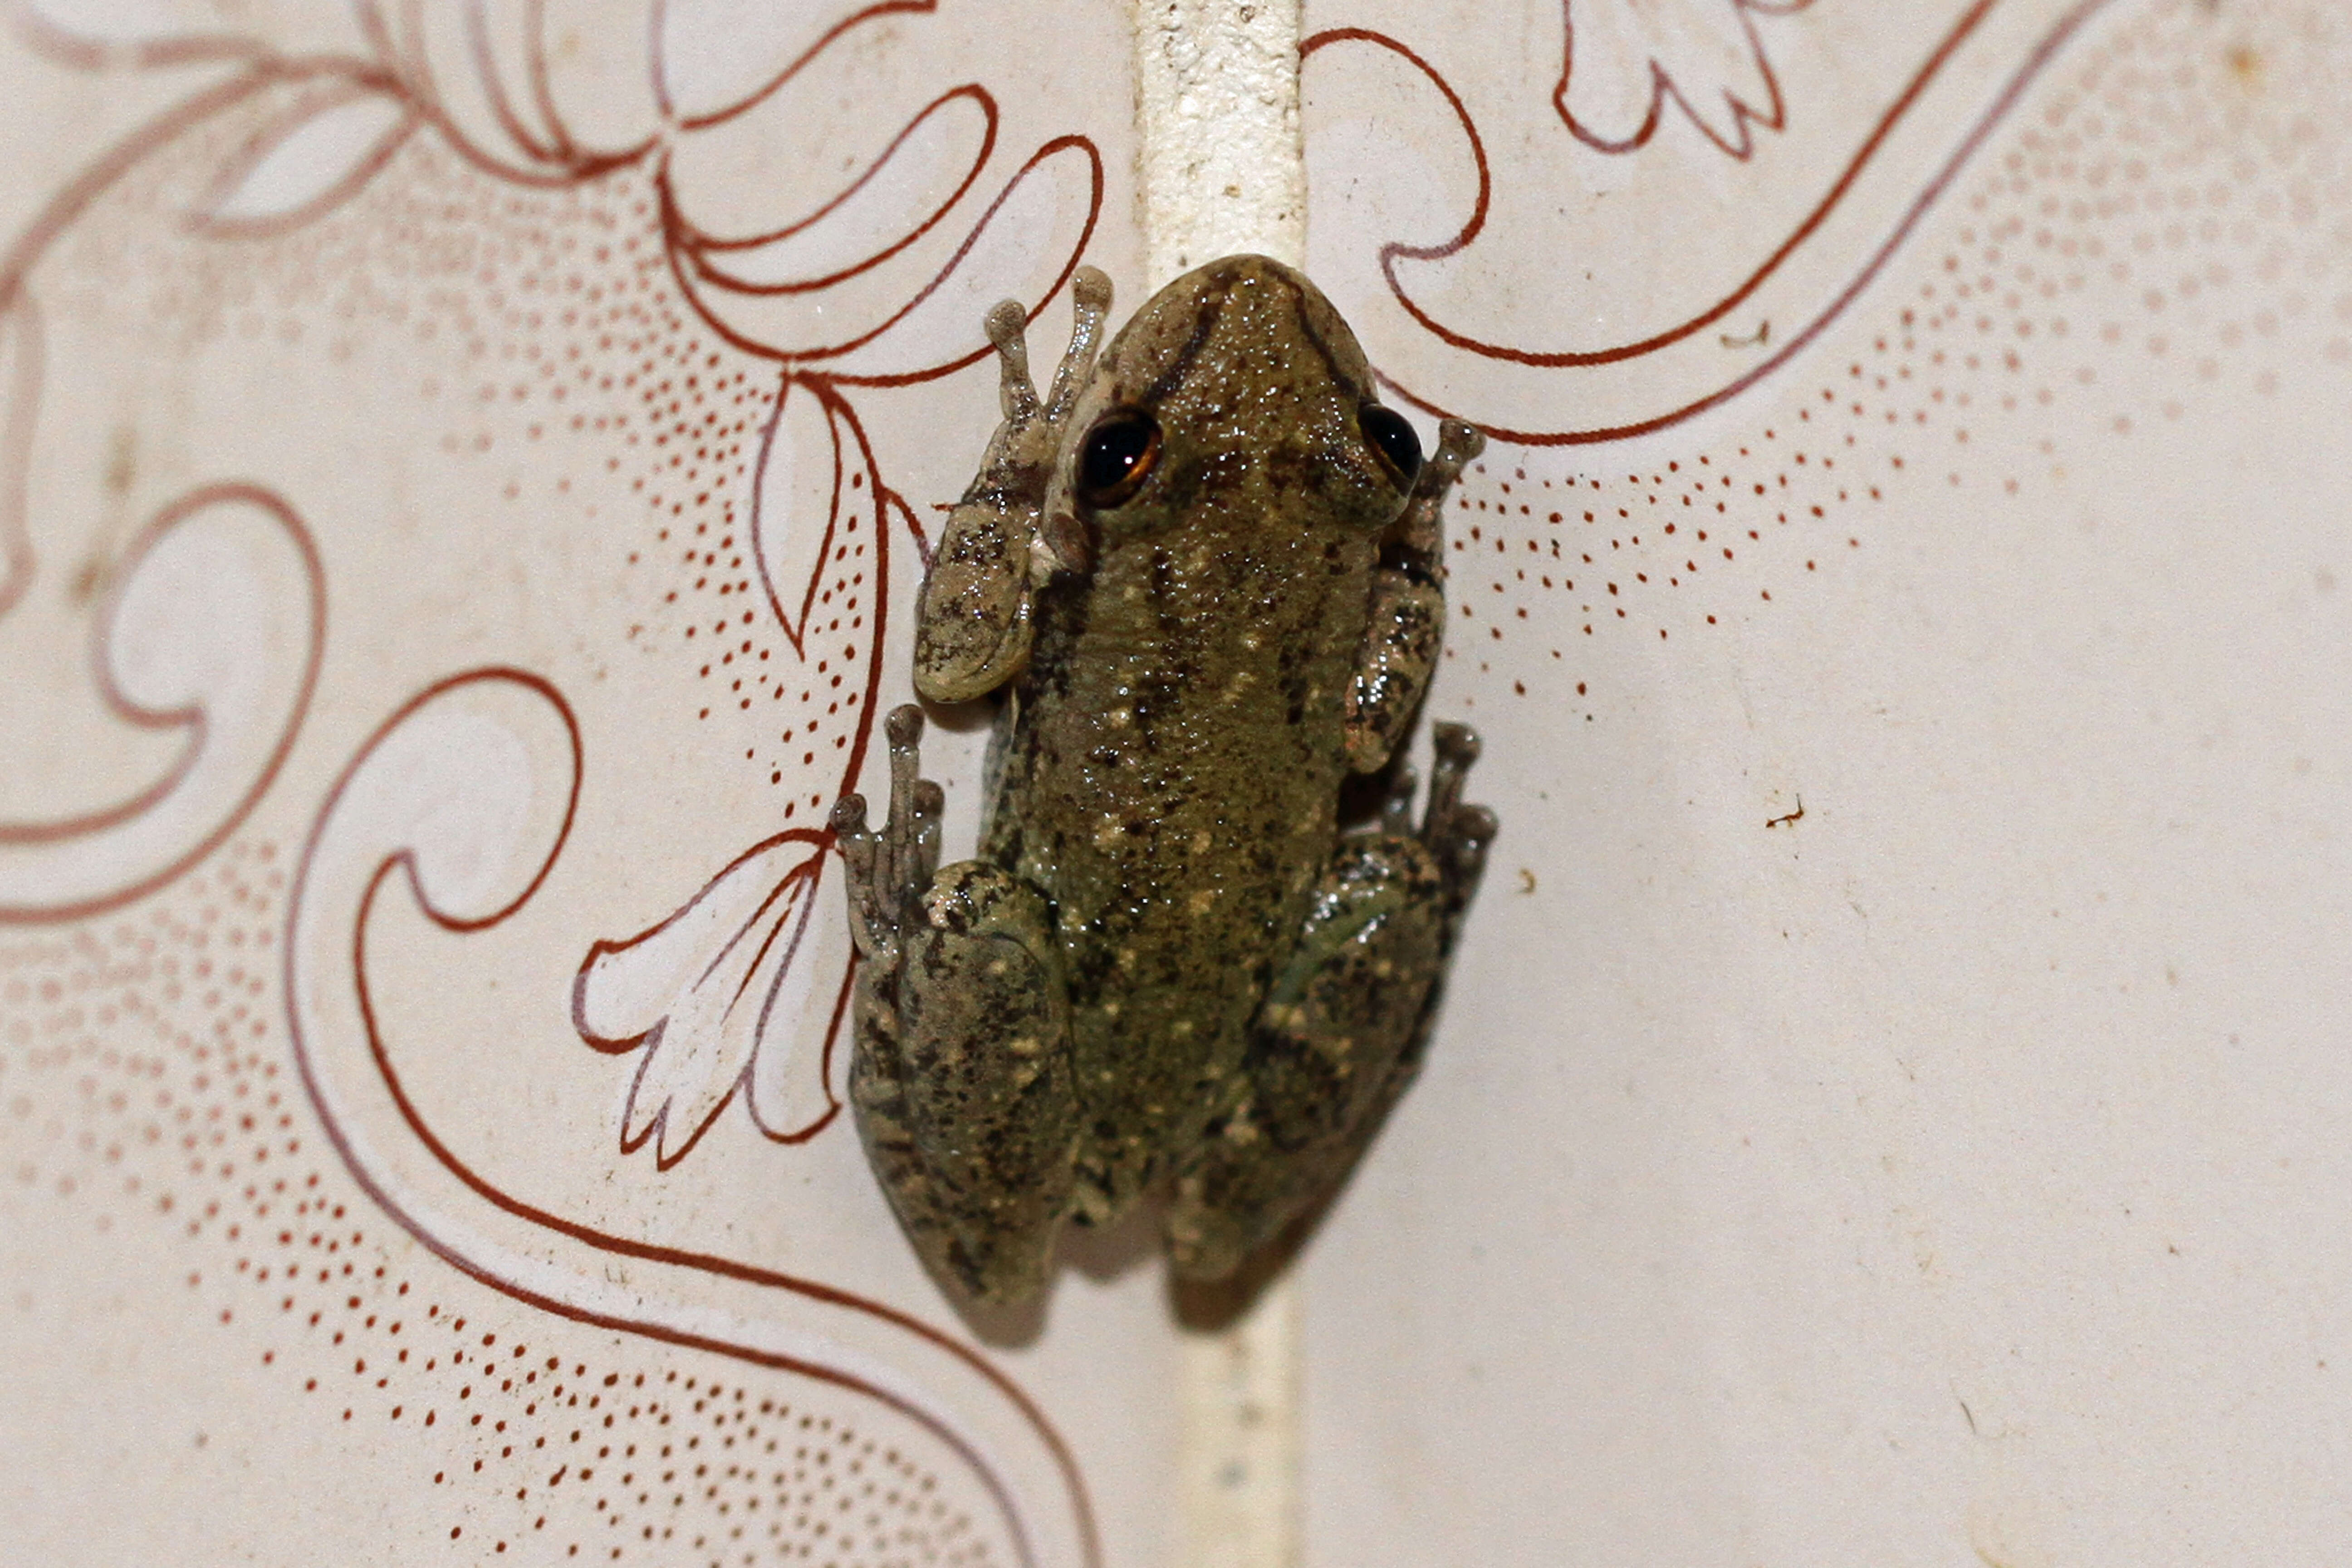 Image of Lesser Snouted Treefrog